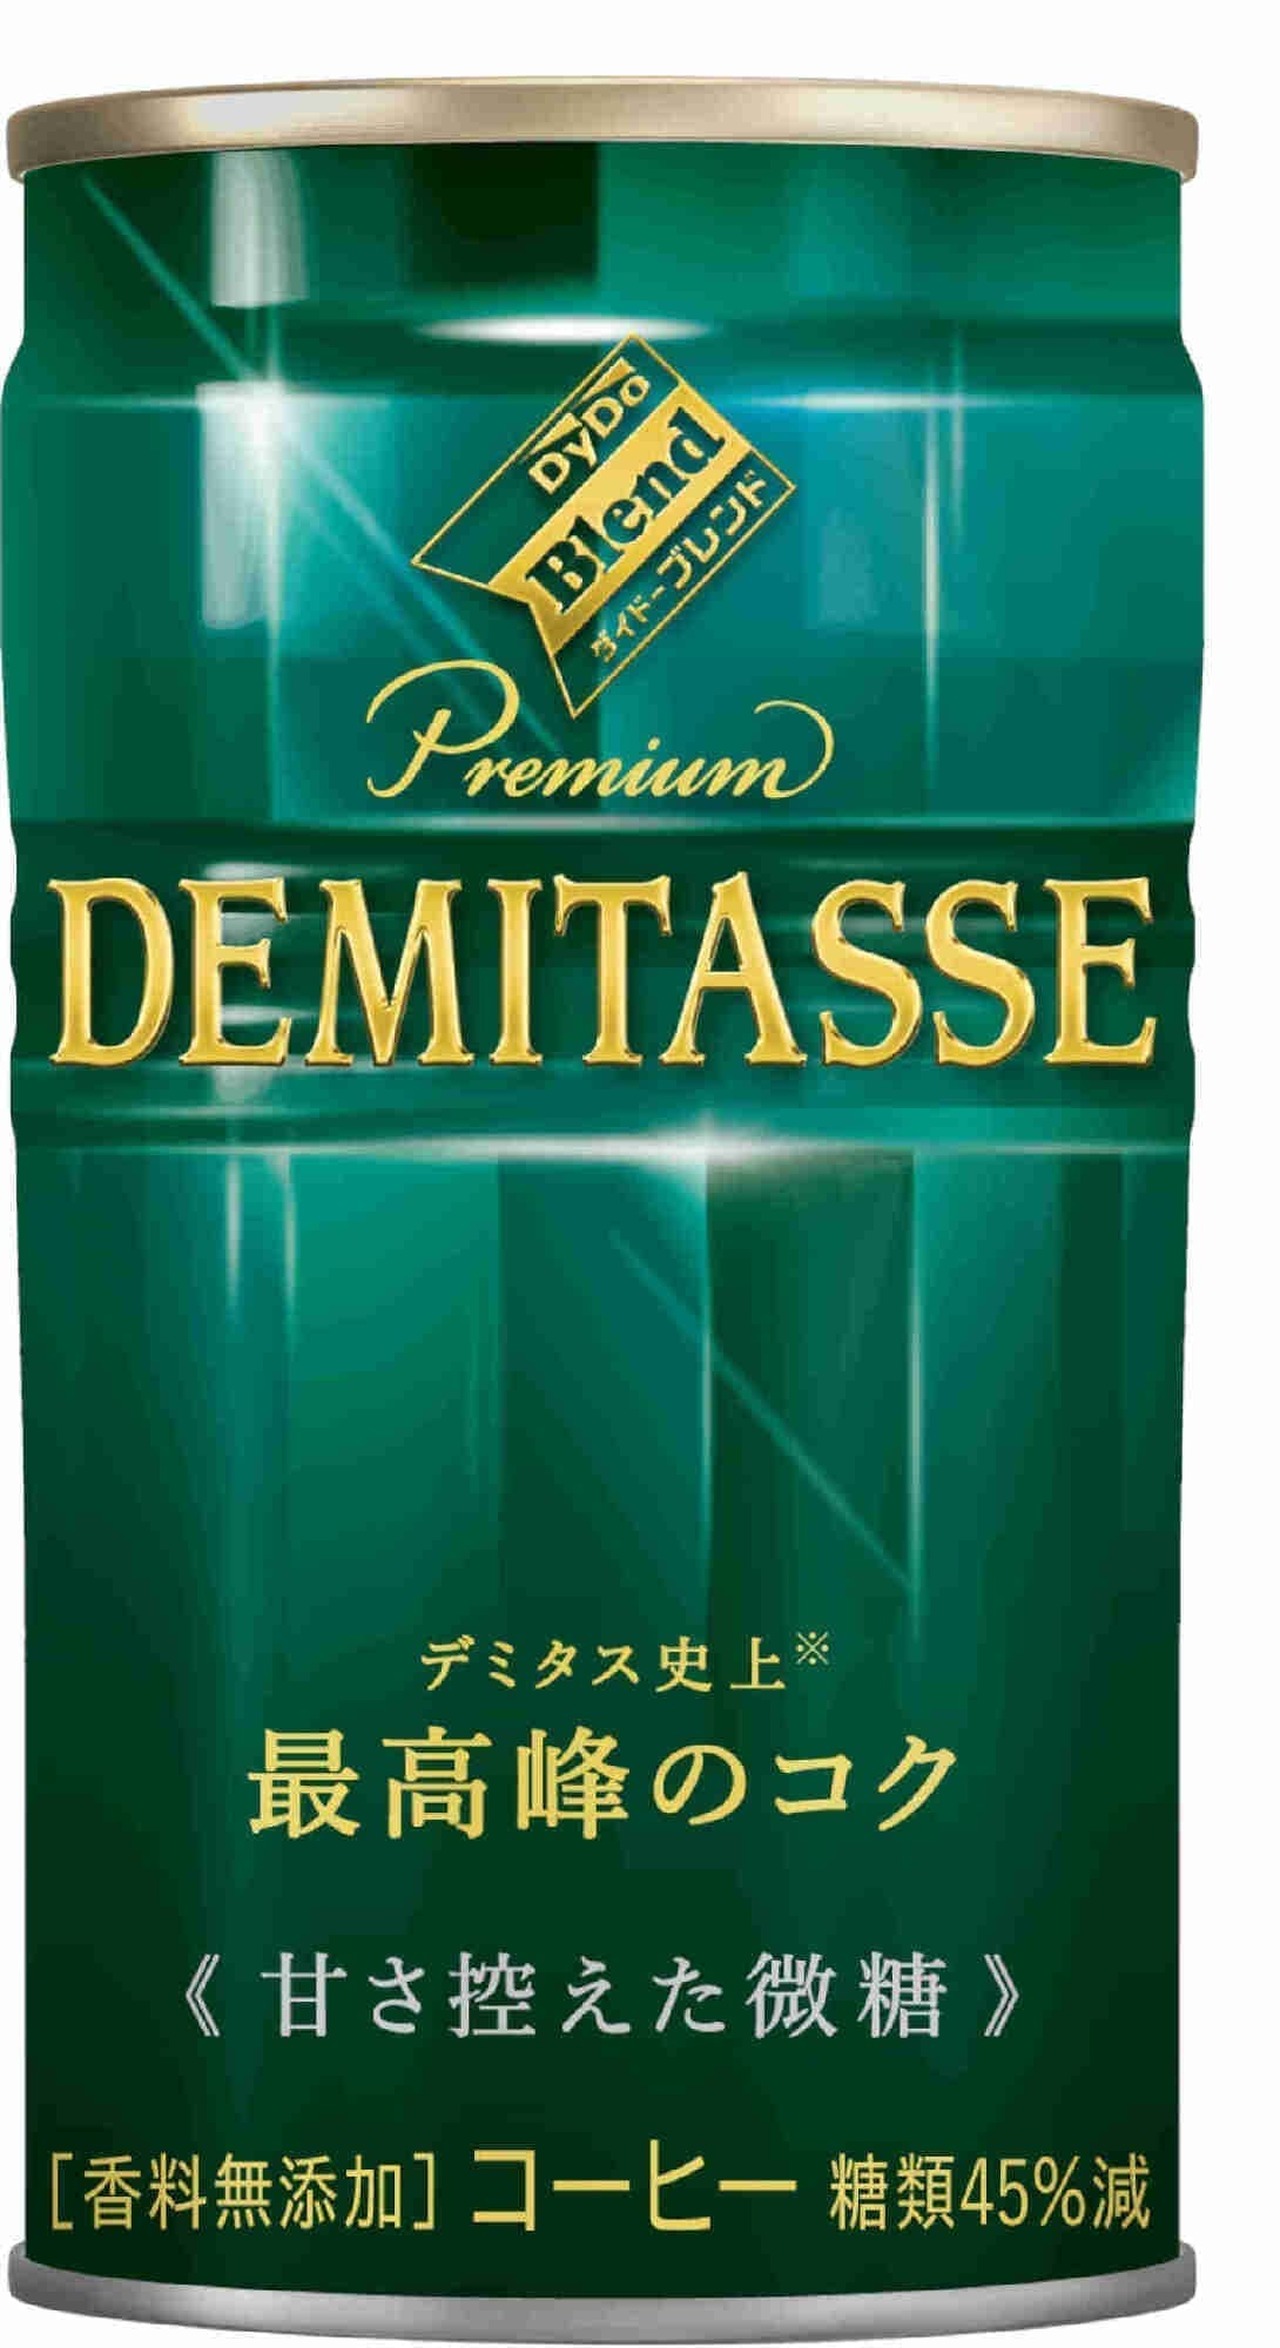 "Dydo Blend Premium Demitasse" 5 types of premium canned coffee with 1.5 times the amount of beans